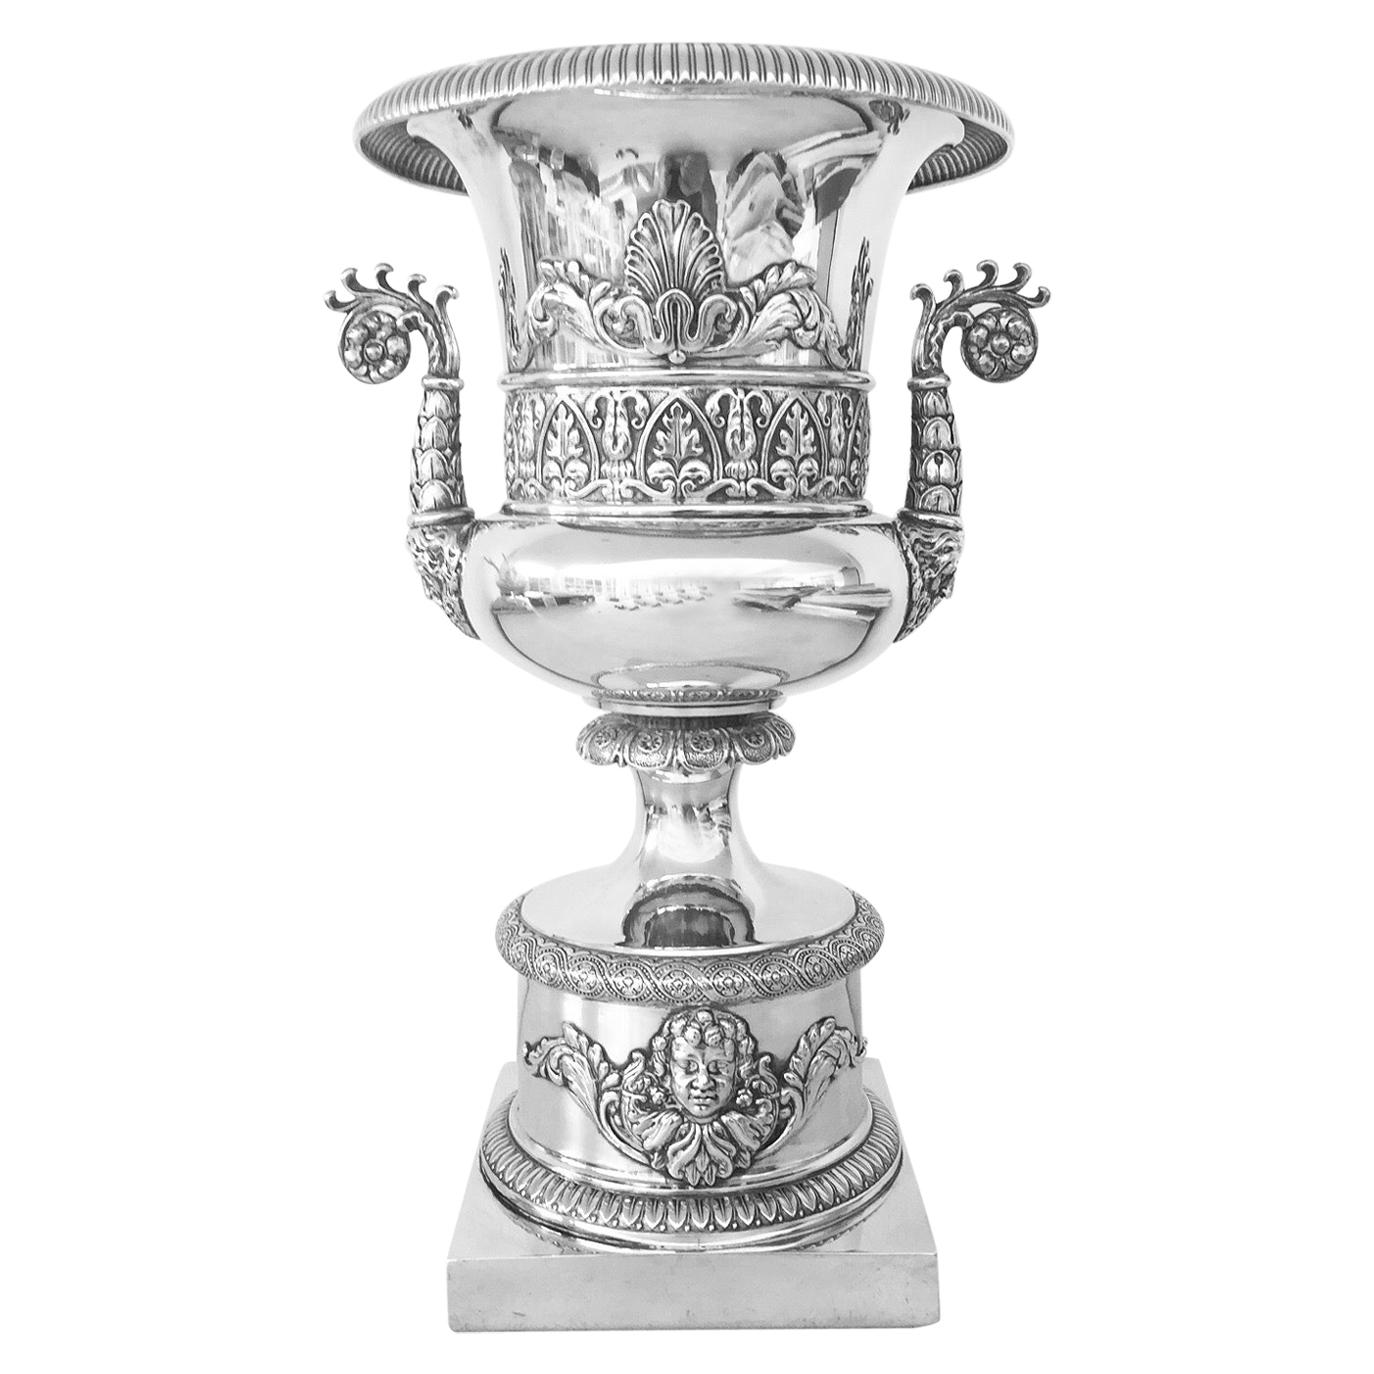 Early 19th Century Italian Neoclassical Silver Urn Vase Milan by Emanuele Caber